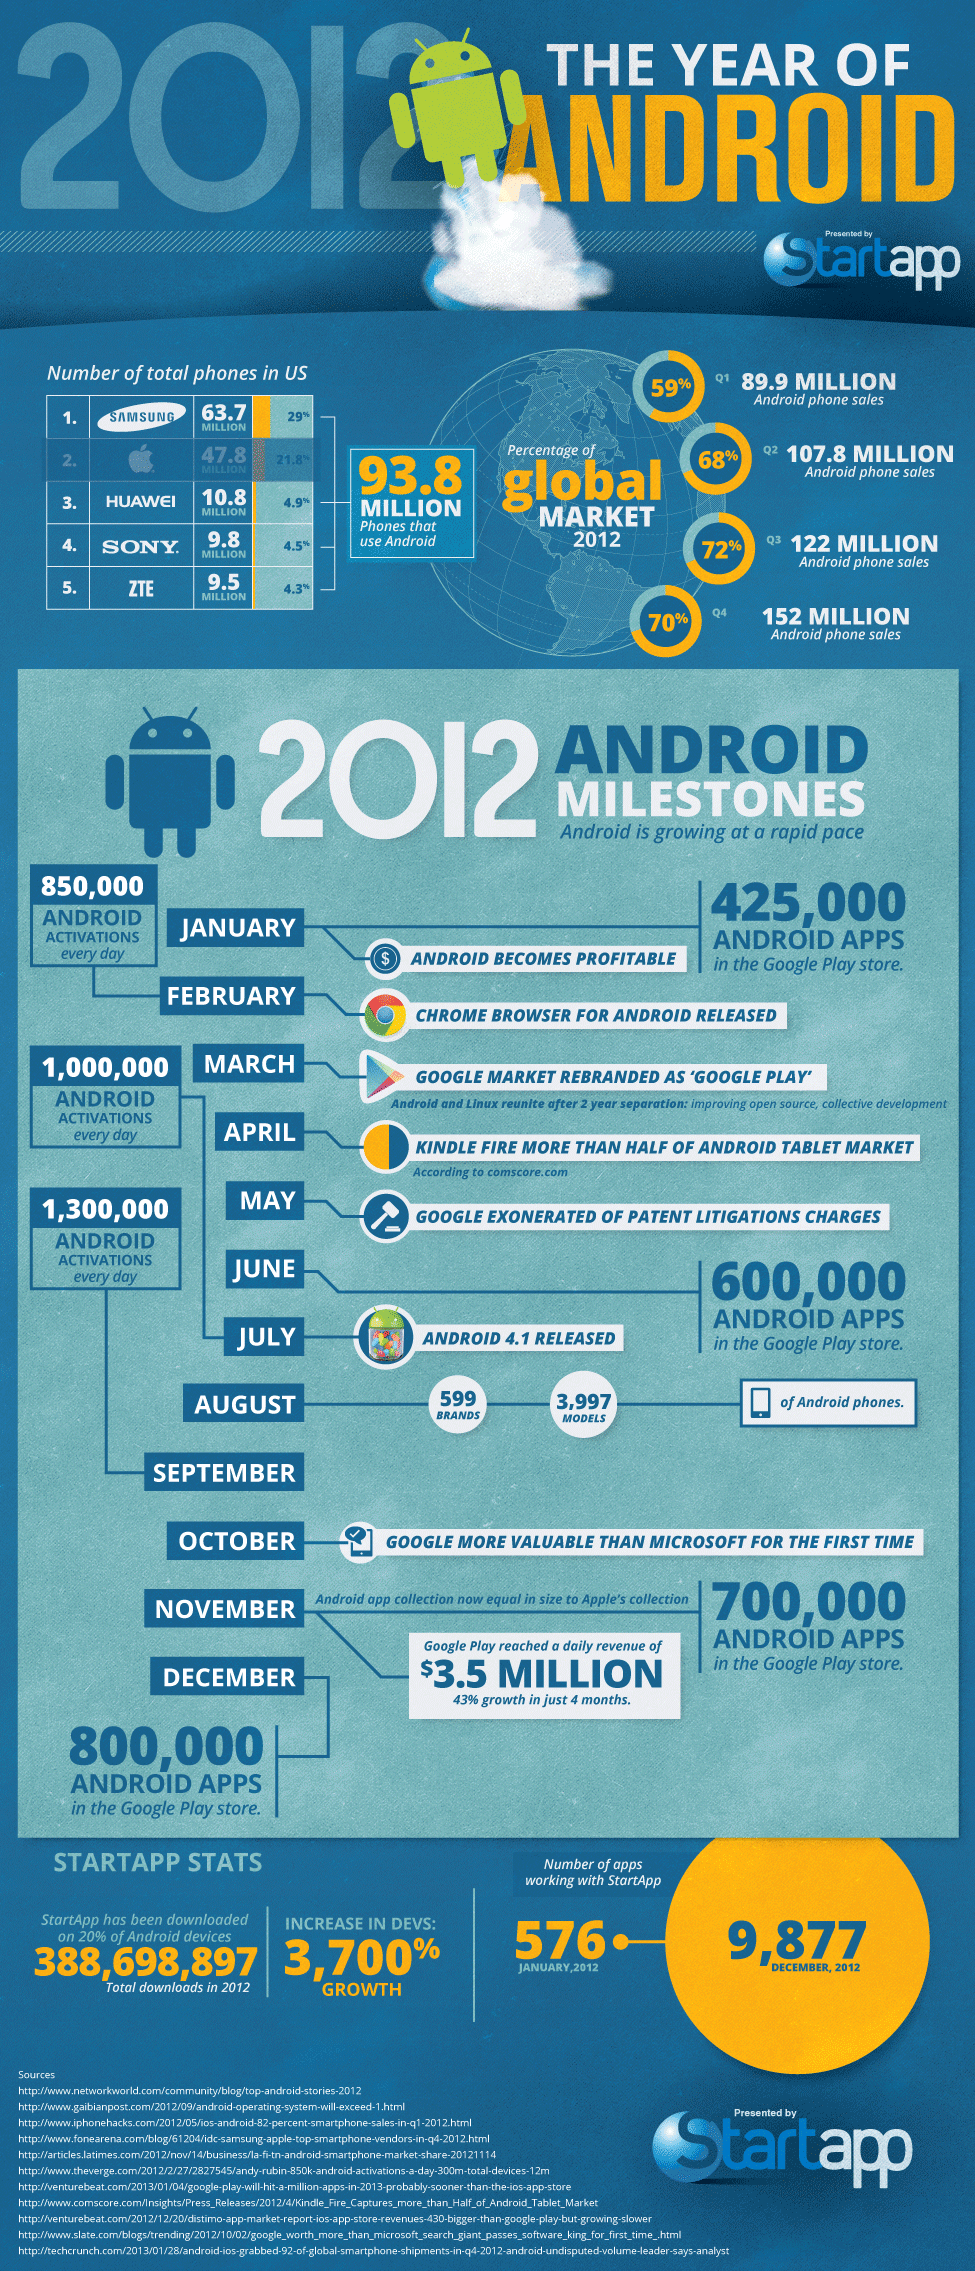 2012: The Year of Android